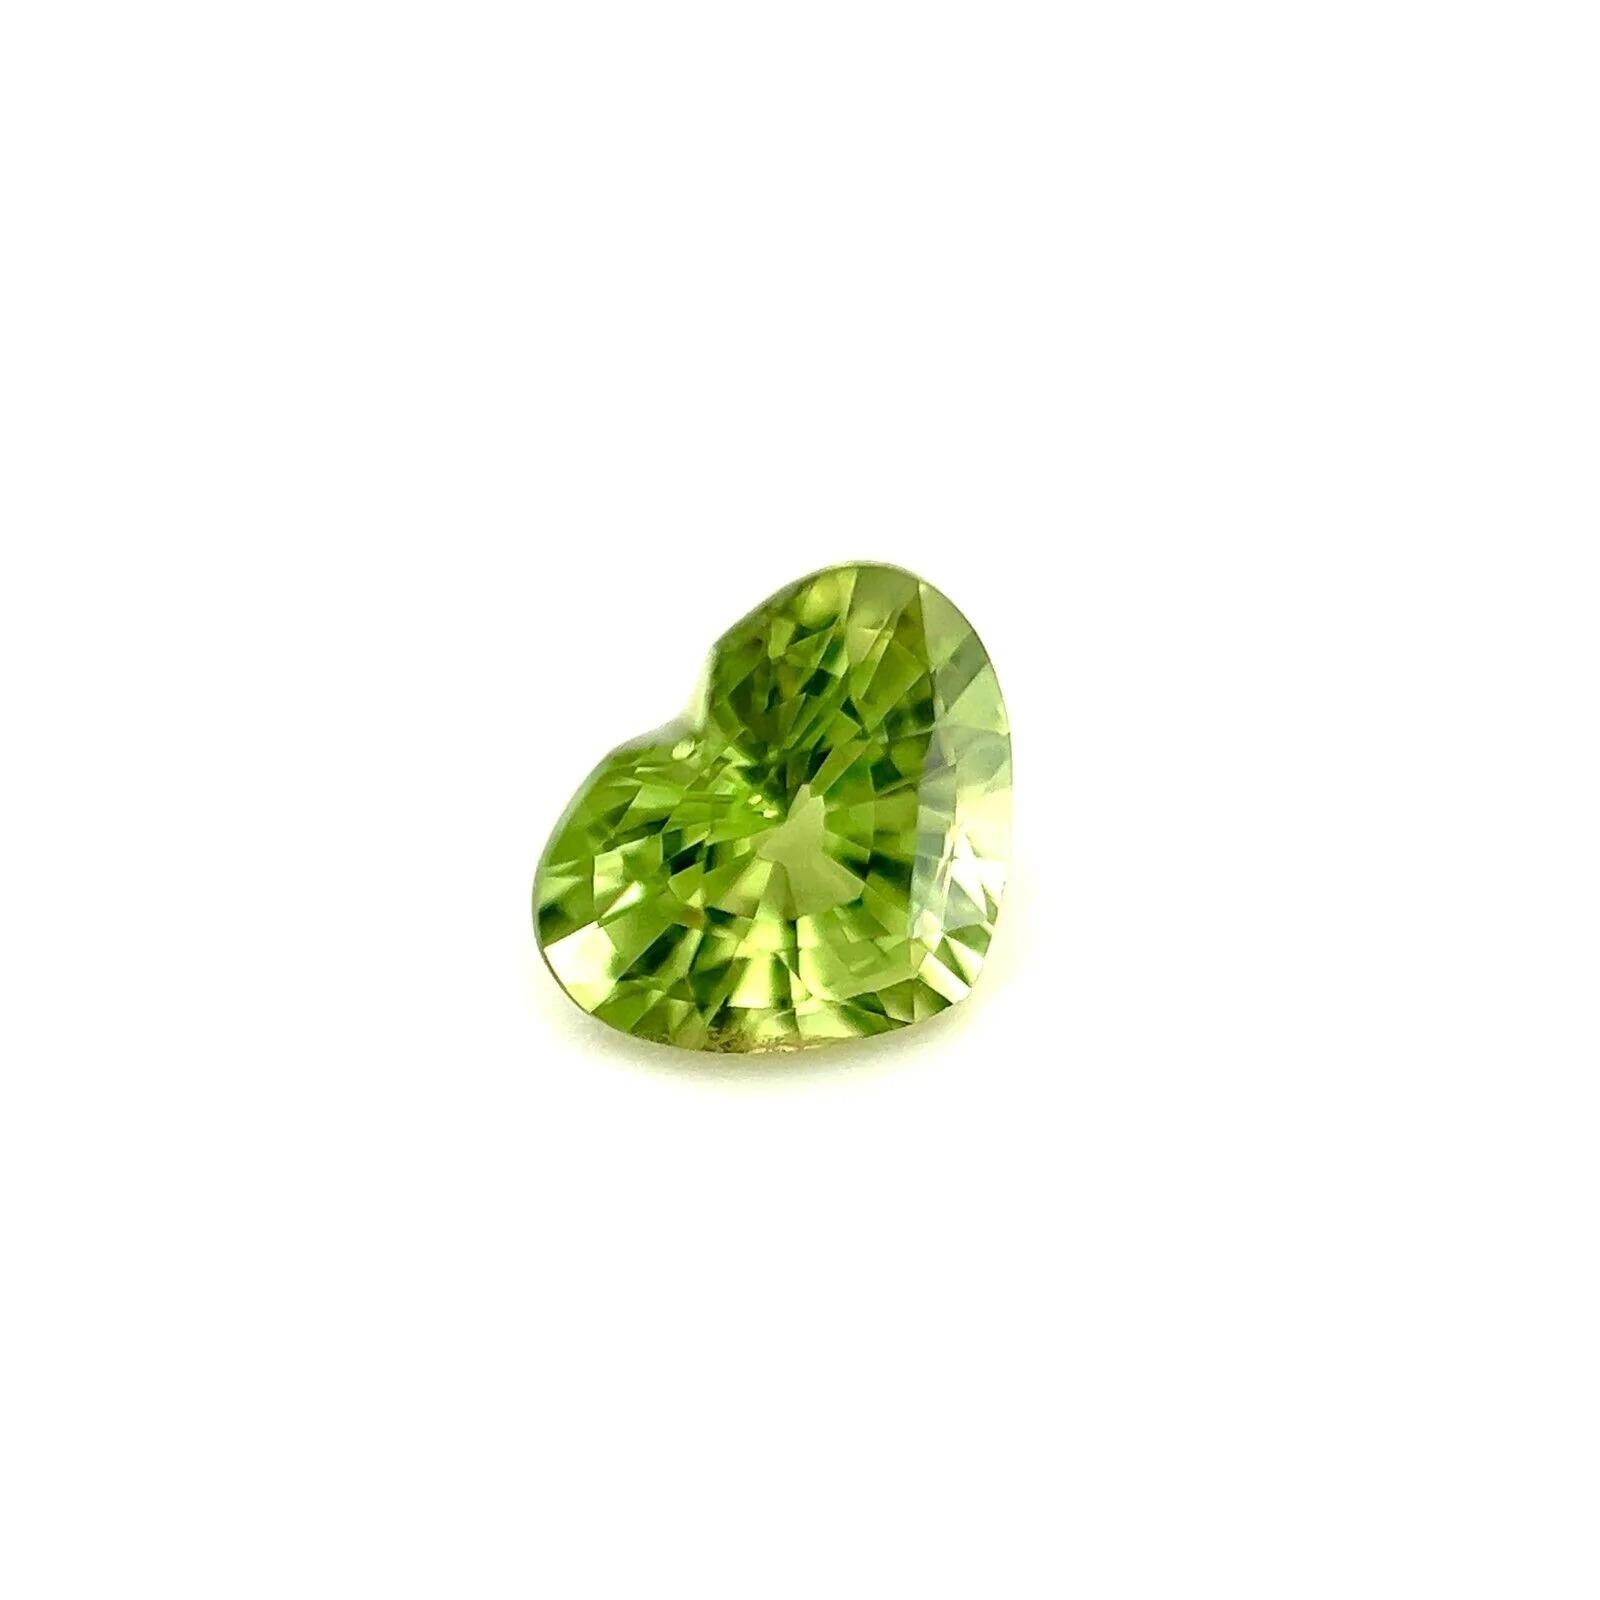 Fine Vivid Green Colour Sapphire 0.79ct Heart Cut Loose Gemstone 6x4.8mm VVS

Natural Green Sapphire Heart Cut Gem. 
0.79 Carat with a beautiful and unique green colour. Very rare and stunning to see. Has very good clarity, a very clean stone. Also